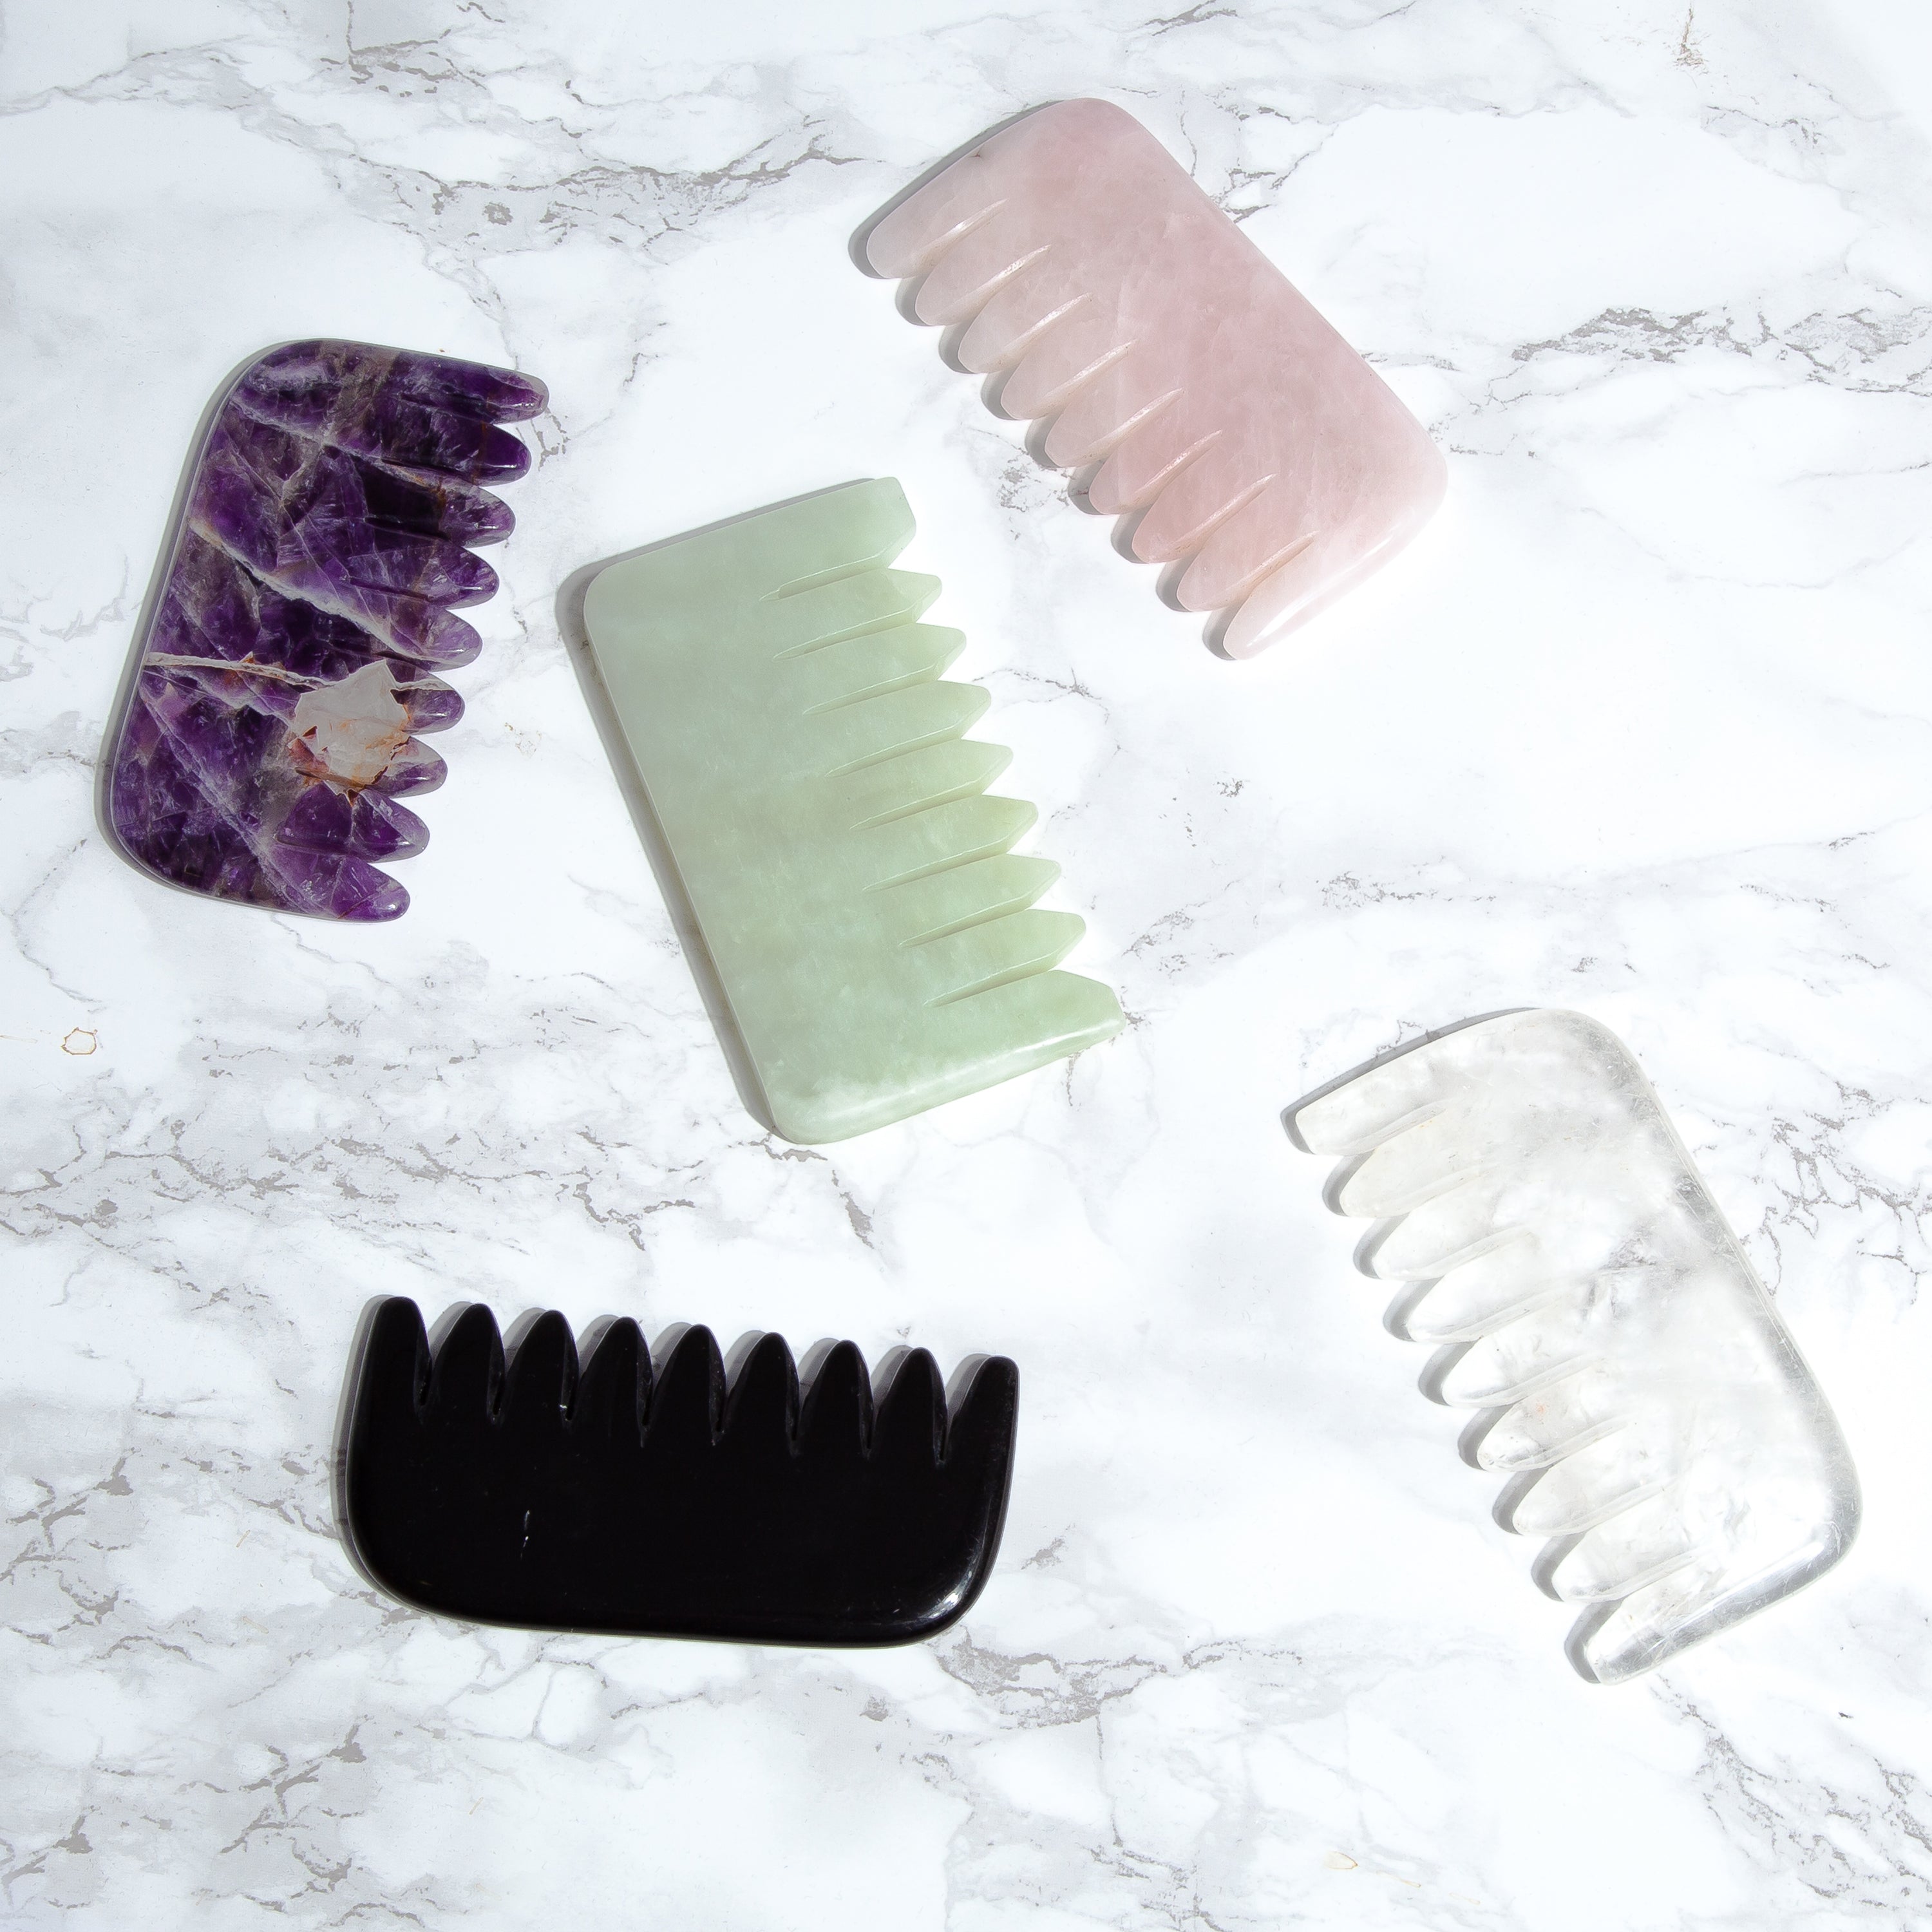 Different Crystal type combs on a marble background